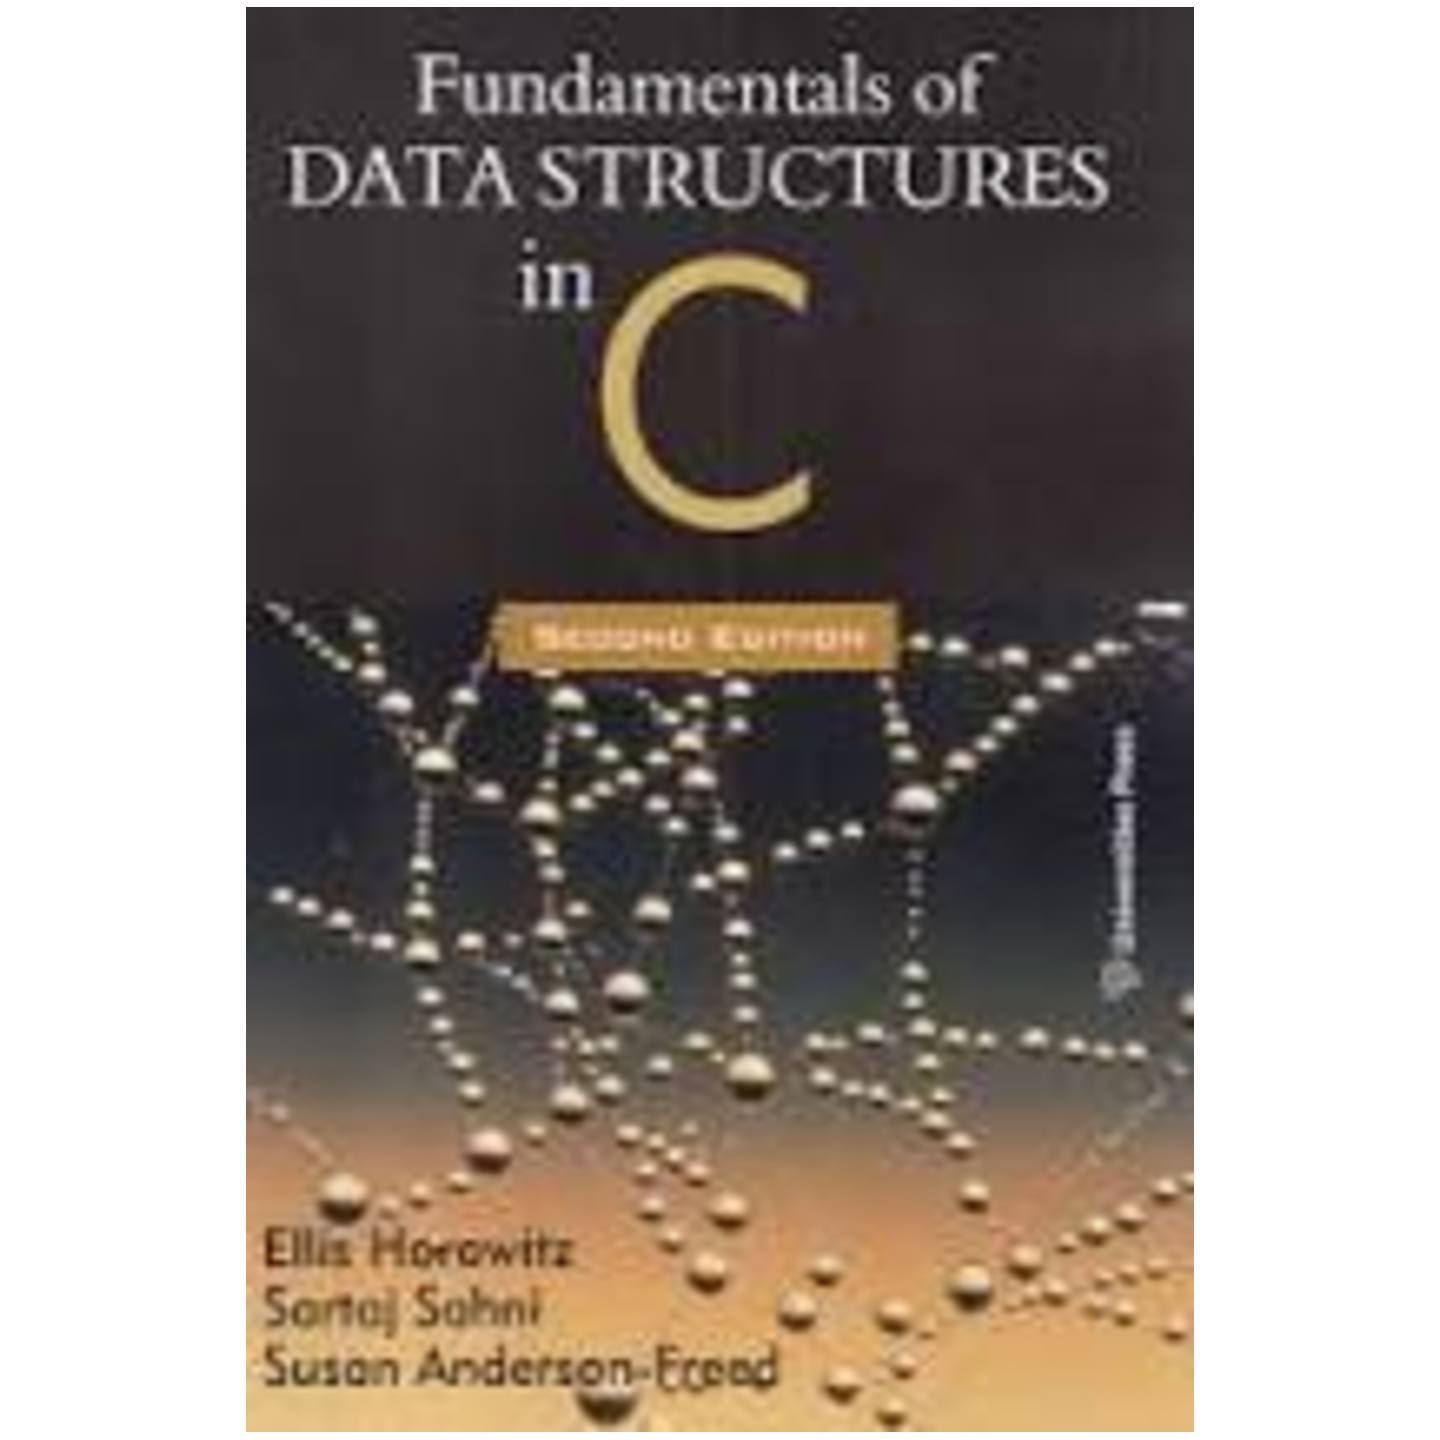 Fundamentals of Data Structures in C (Second Edition) Paperback – 1